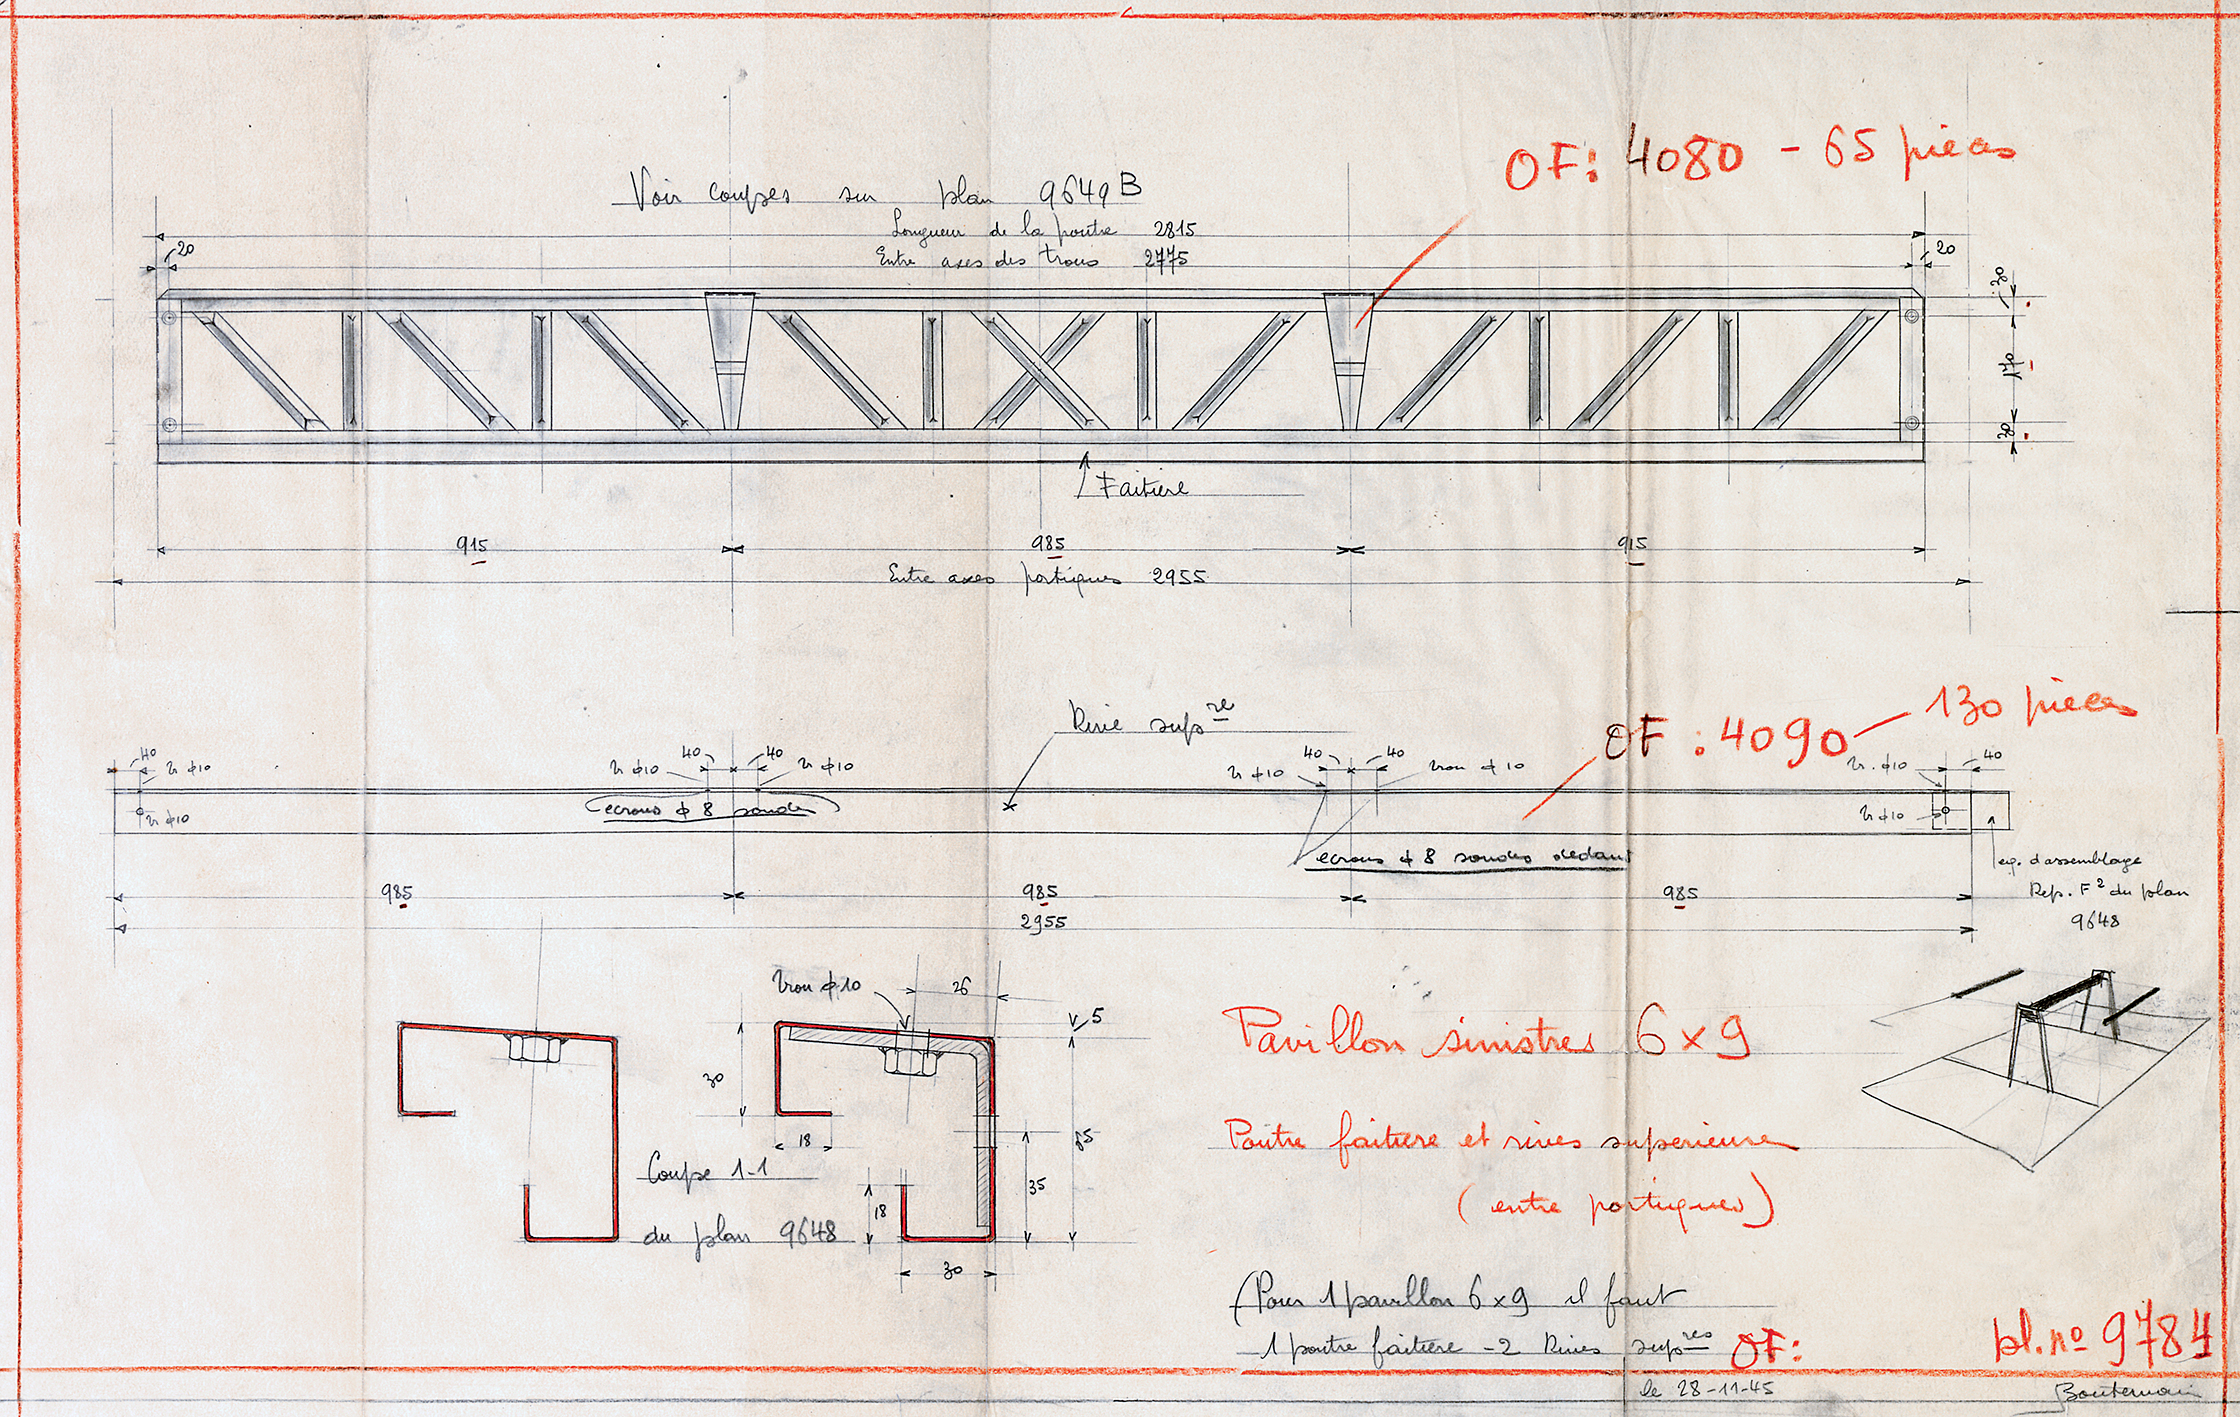 Ateliers Jean Prouvé. “6x9 War victims pavilion, ridge beam and upper beams (between portal frames)”, drawing no. 9784, 28 November 1945, by J. Boutemain.